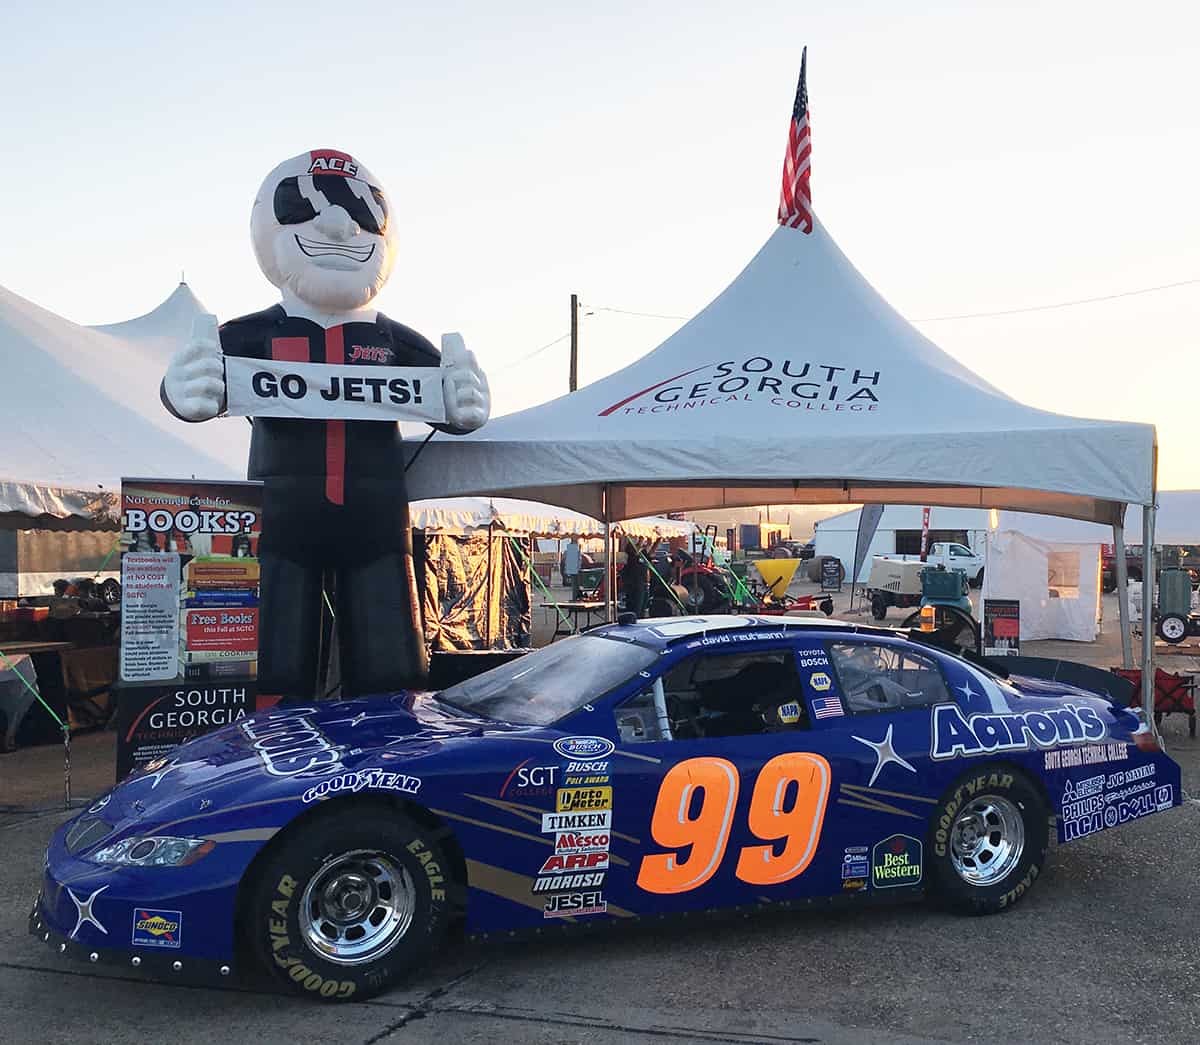 South Georgia Technical College has the Aaron’s Rents Motorsports Race Car on display as well as the Jets Mascot ACE, a CAT Diesel Power Generator and other items that are representative of South Georgia Technical College’s over 200 associate degree, diploma, or technical certificate of credit programs.